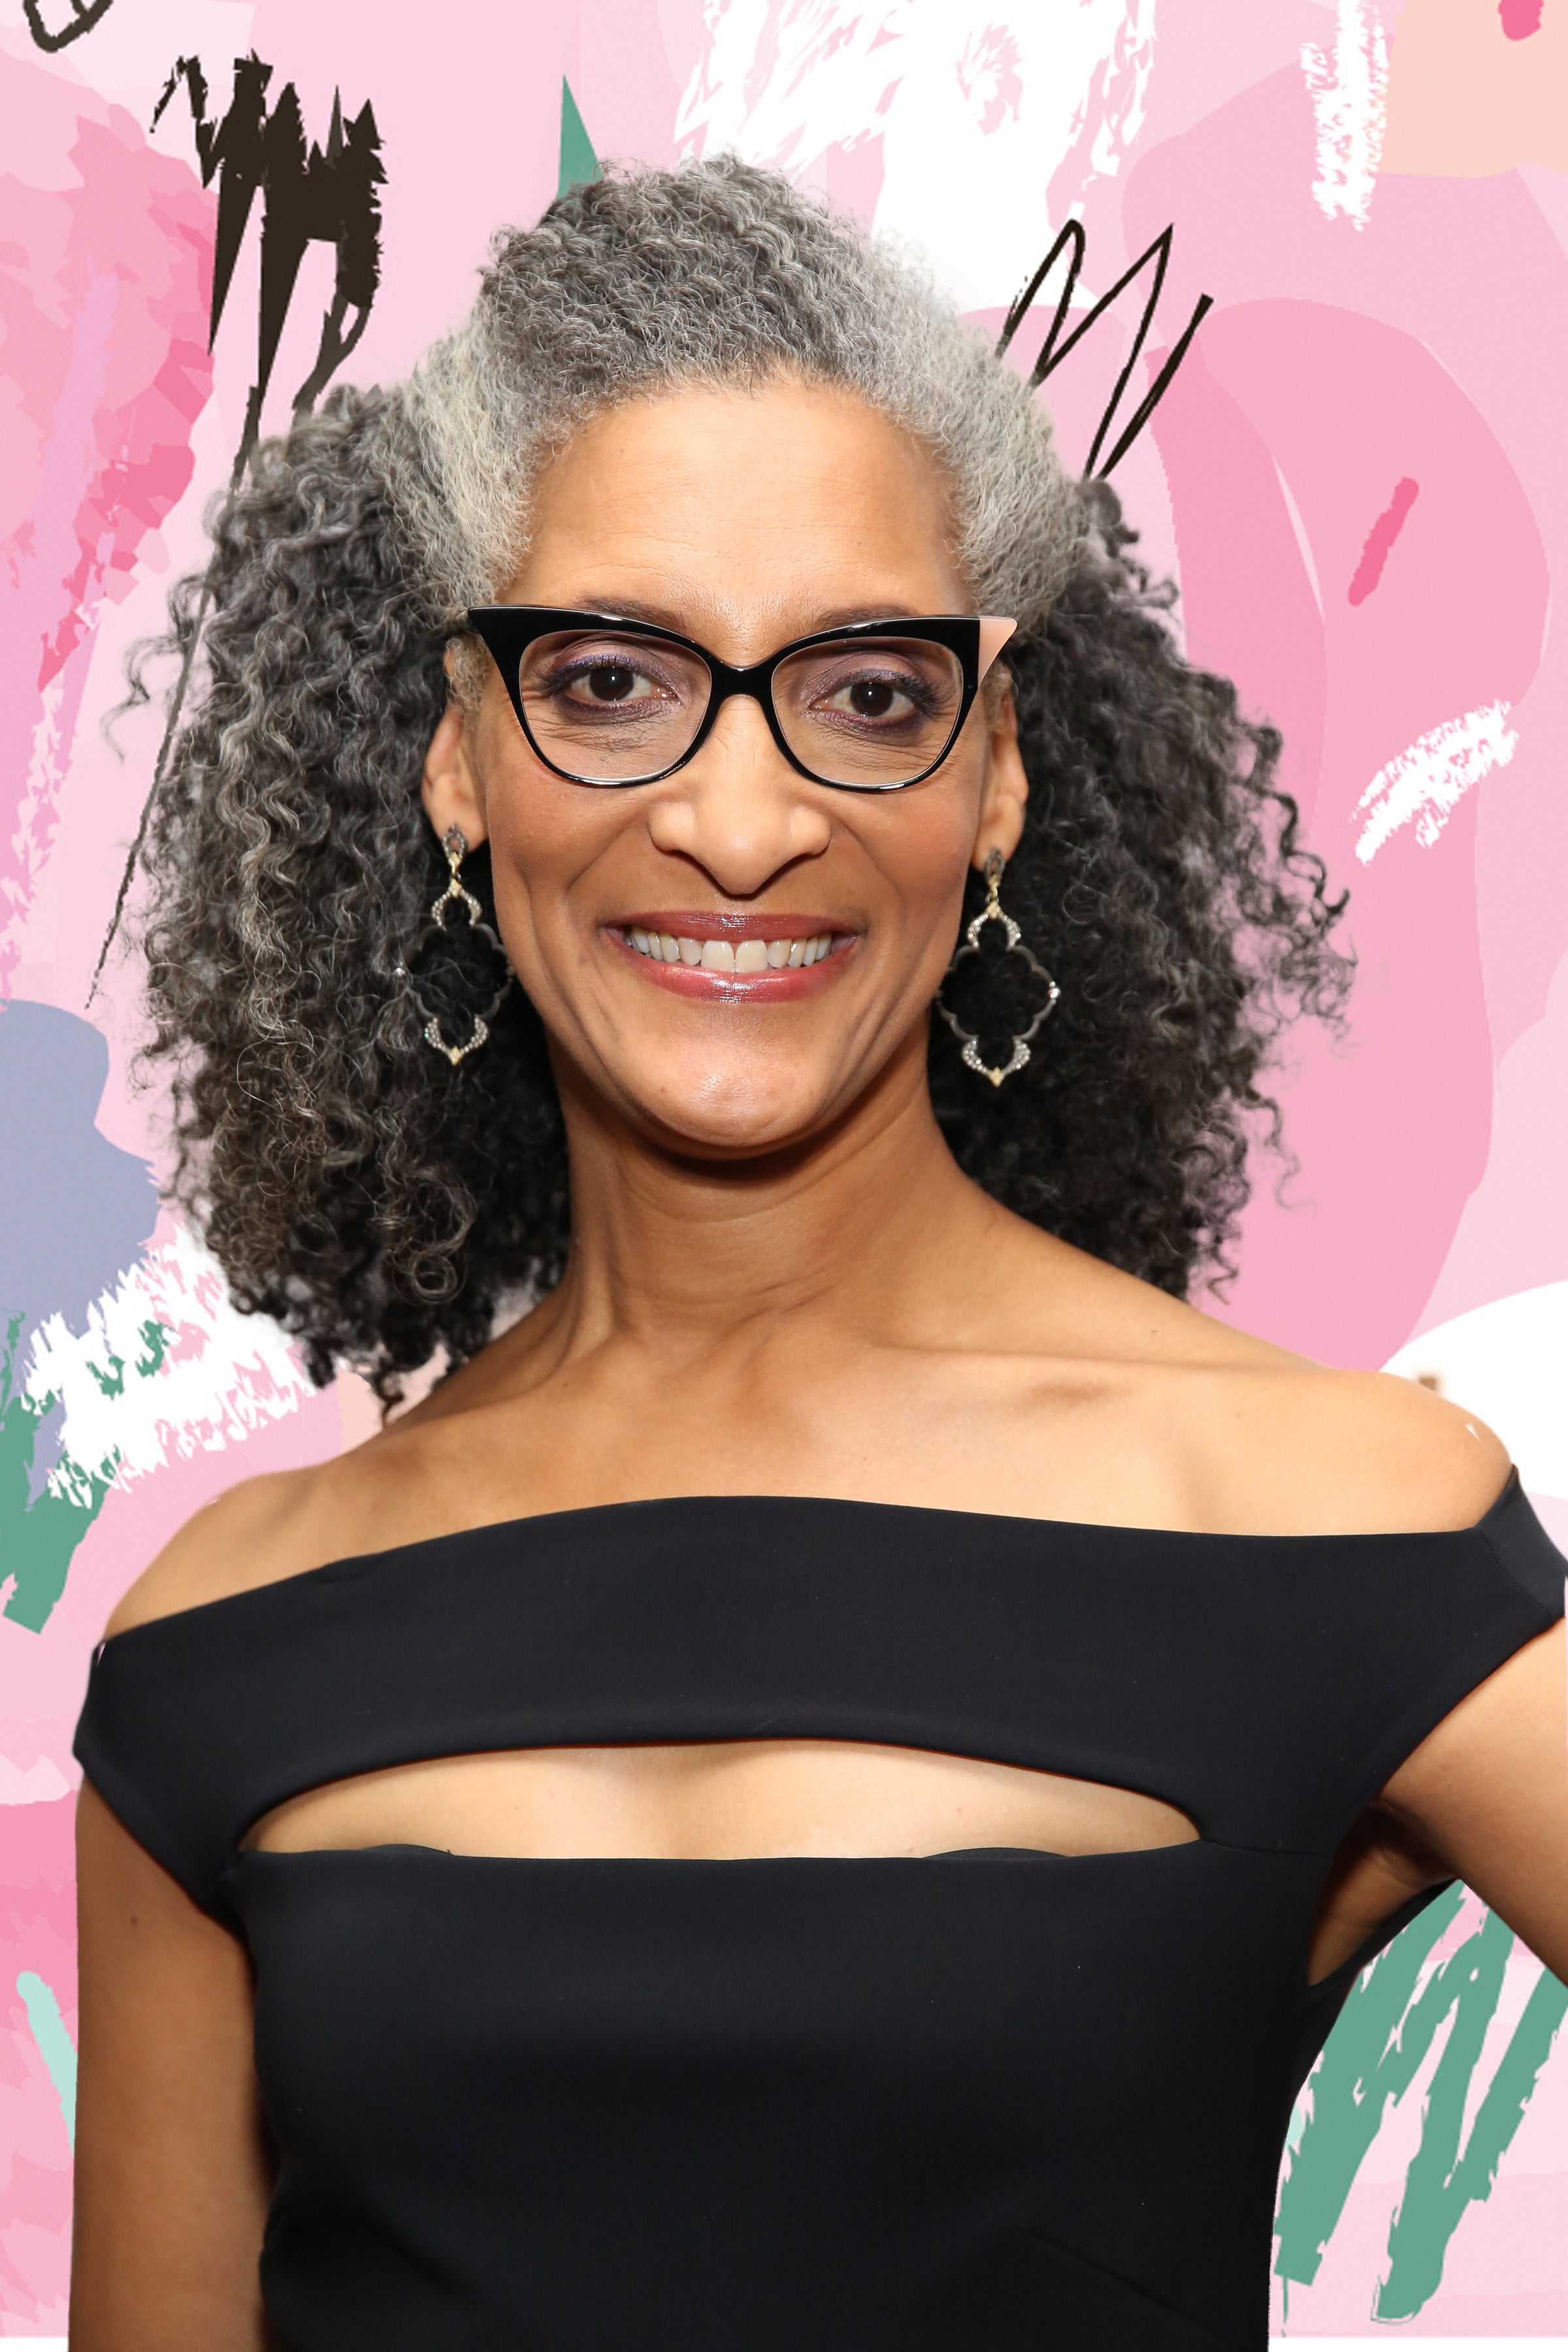 You'll Never Guess How Carla Hall Remixes Her Mac-N-Cheese
 
